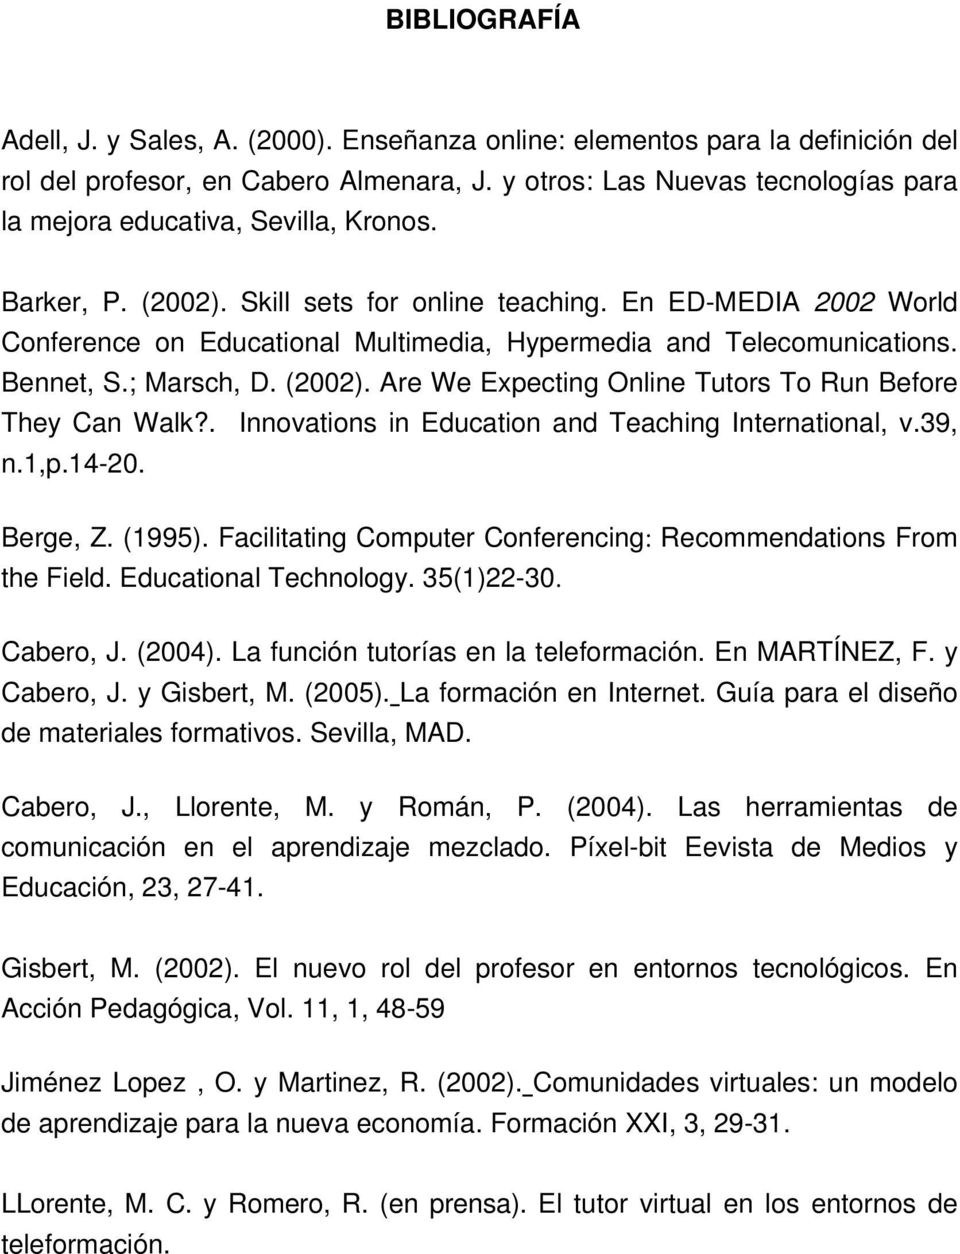 En ED-MEDIA 2002 World Conference on Educational Multimedia, Hypermedia and Telecomunications. Bennet, S.; Marsch, D. (2002). Are We Expecting Online Tutors To Run Before They Can Walk?